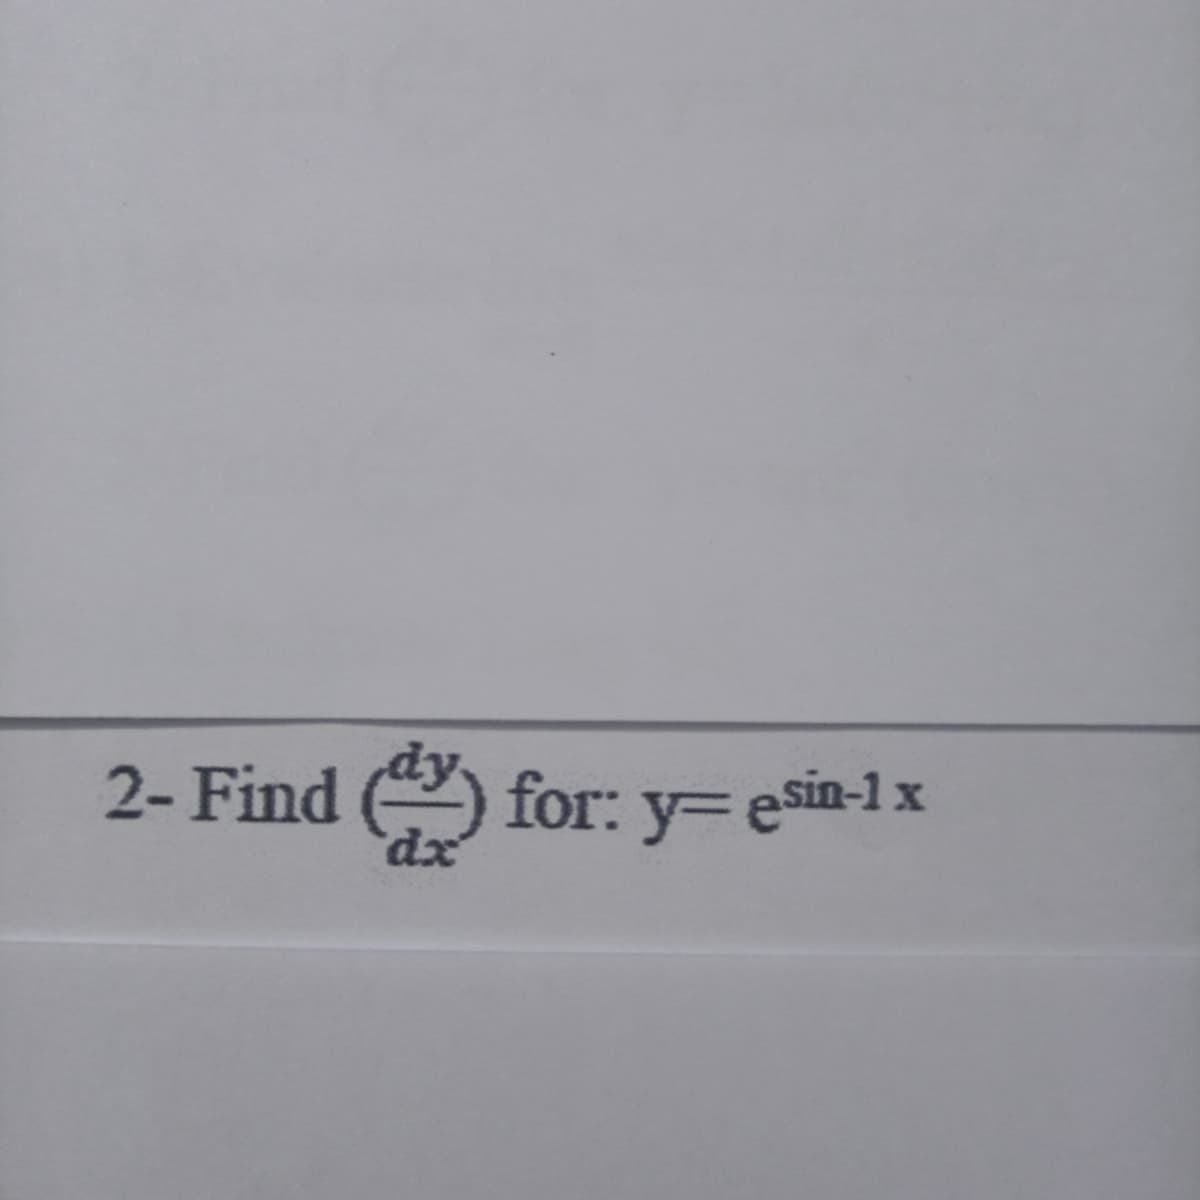 2- Find ) for: y= esin-1 x
